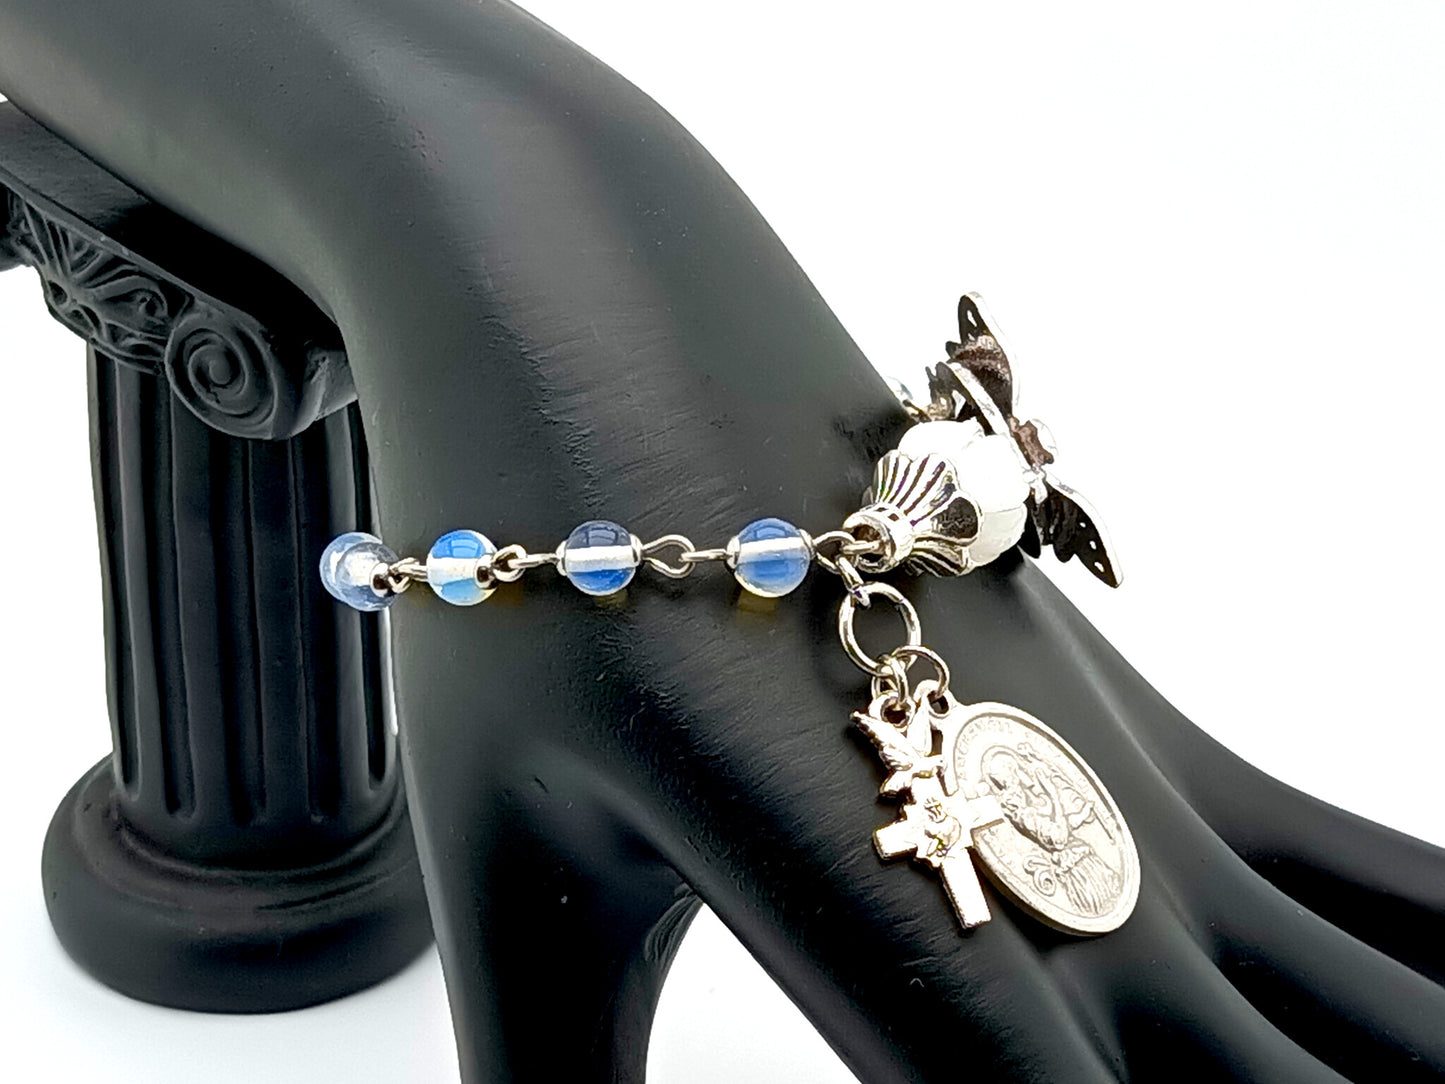 Saint Gabriel Archangel unique rosary beads single decade rosary bracelet with opal gemstone beads and dragonfly clasp and Holy Spirit cross.